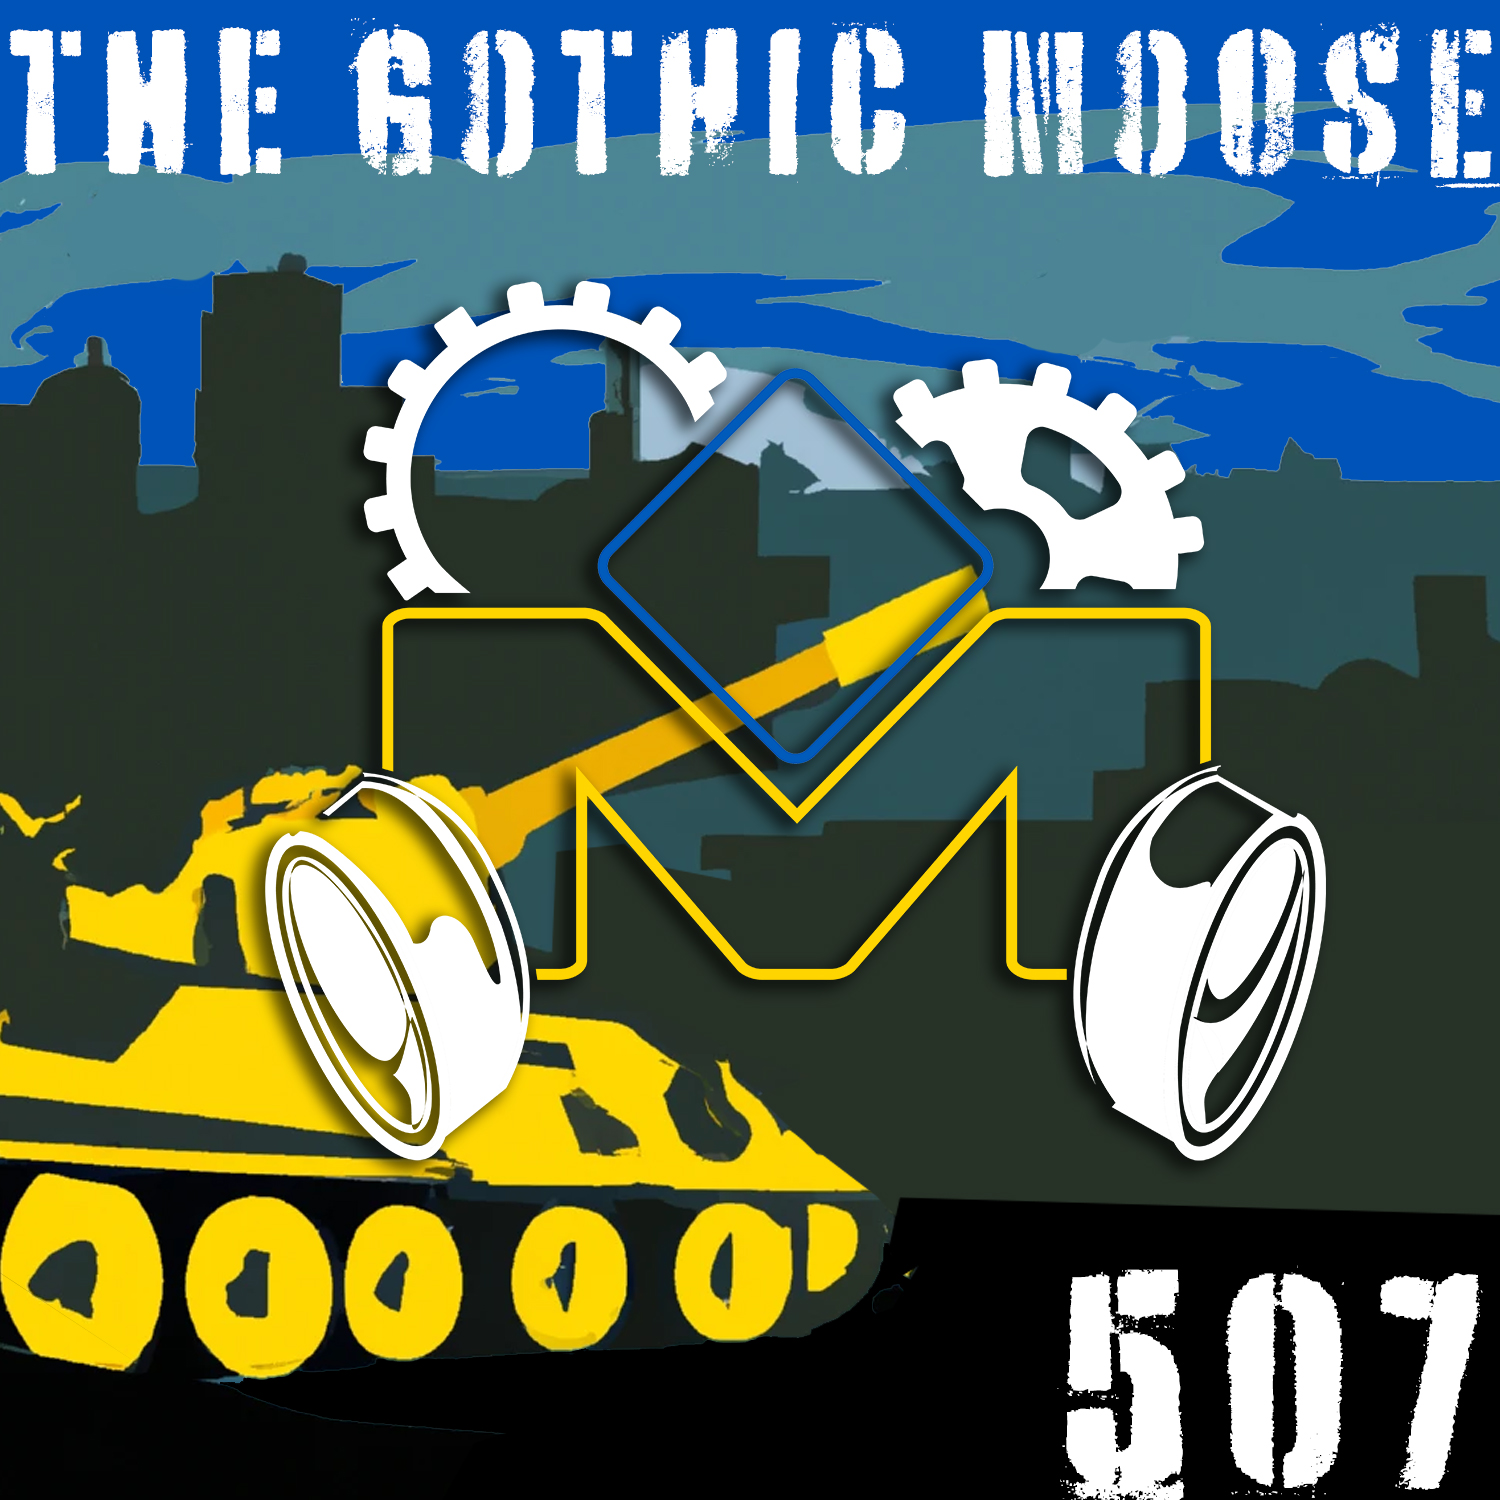 The Gothic Moose – Episode 507 – All Ukrainian bands or bands supporting Ukraine